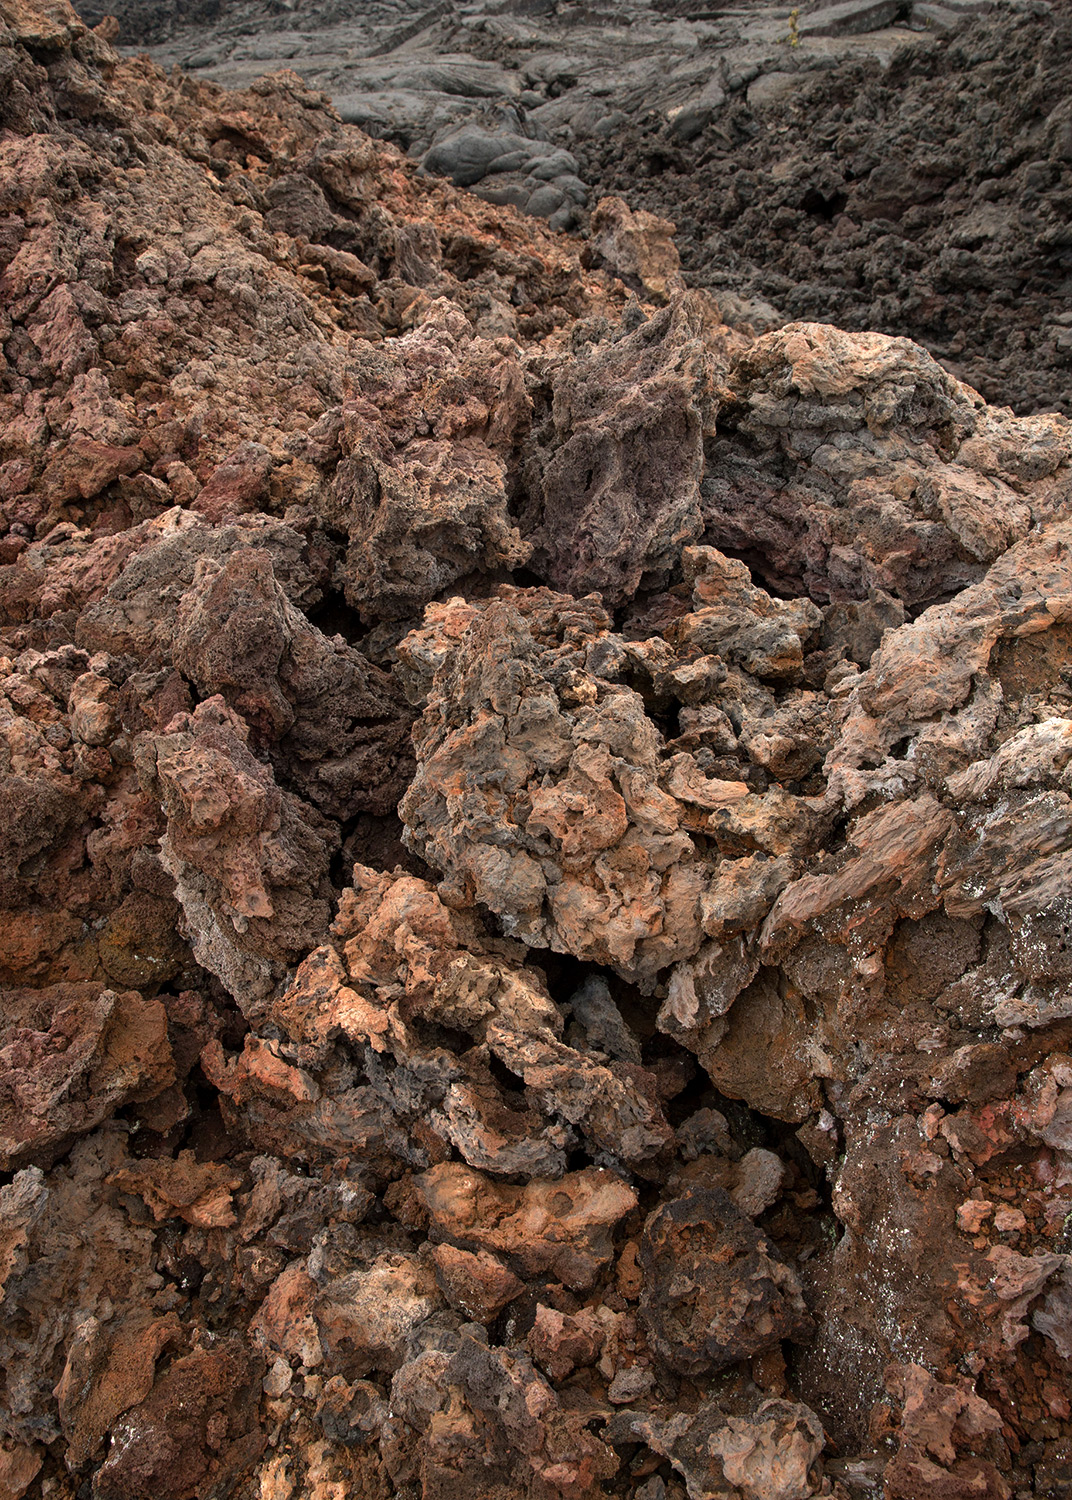 A detail of a lava field at the HI-SEAS Mars simulation habitat on the island of Hawaii on Aug. 29, 2016. (Cassandra Klos for TIME)